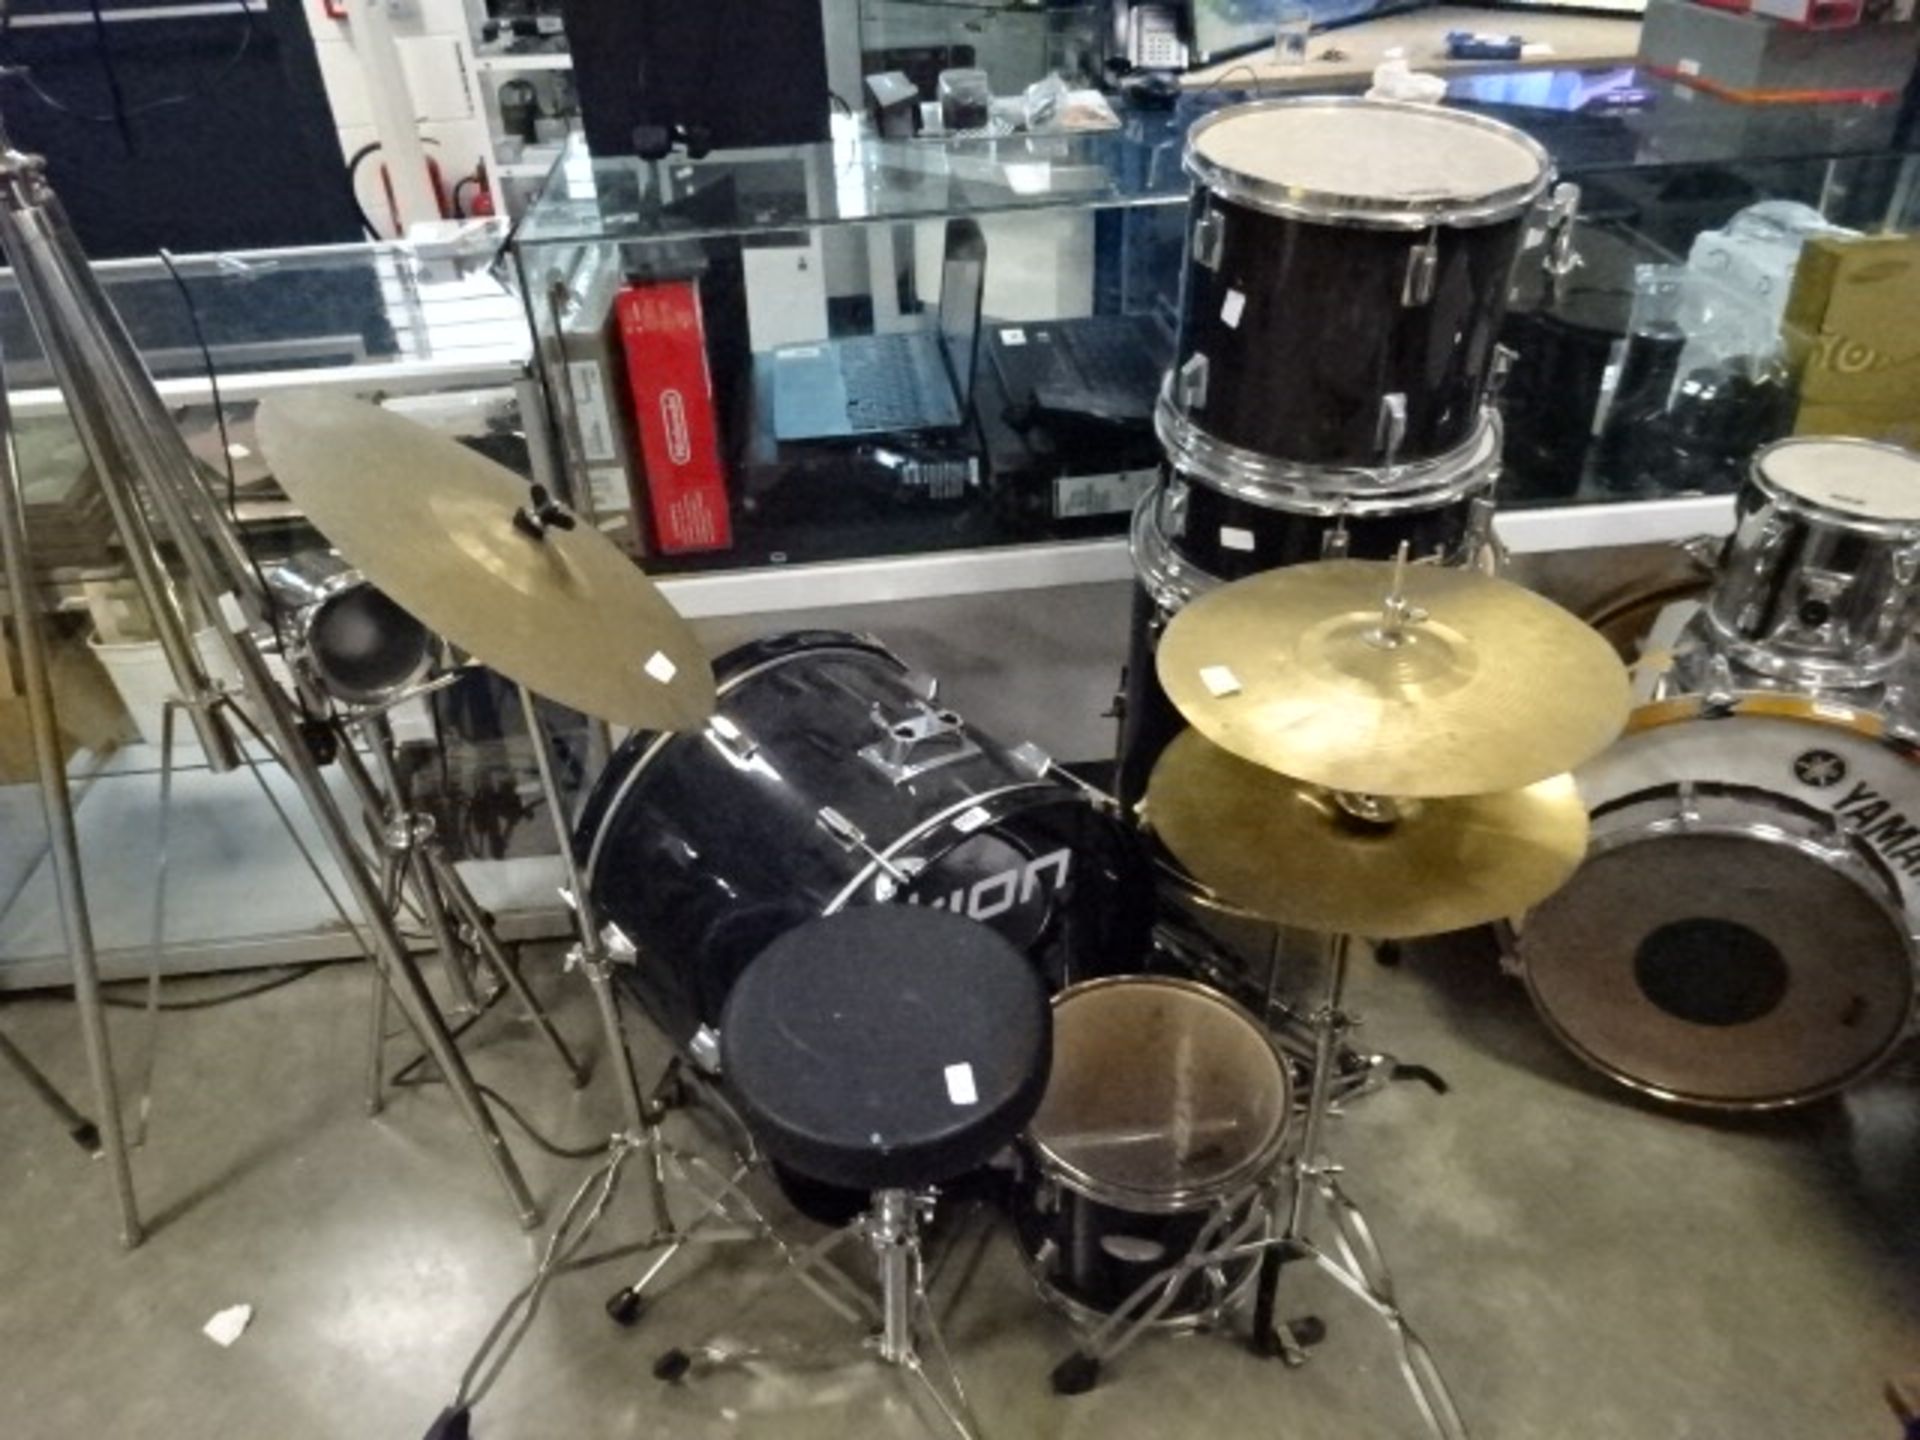 A 7 piece ion drum kit with stool